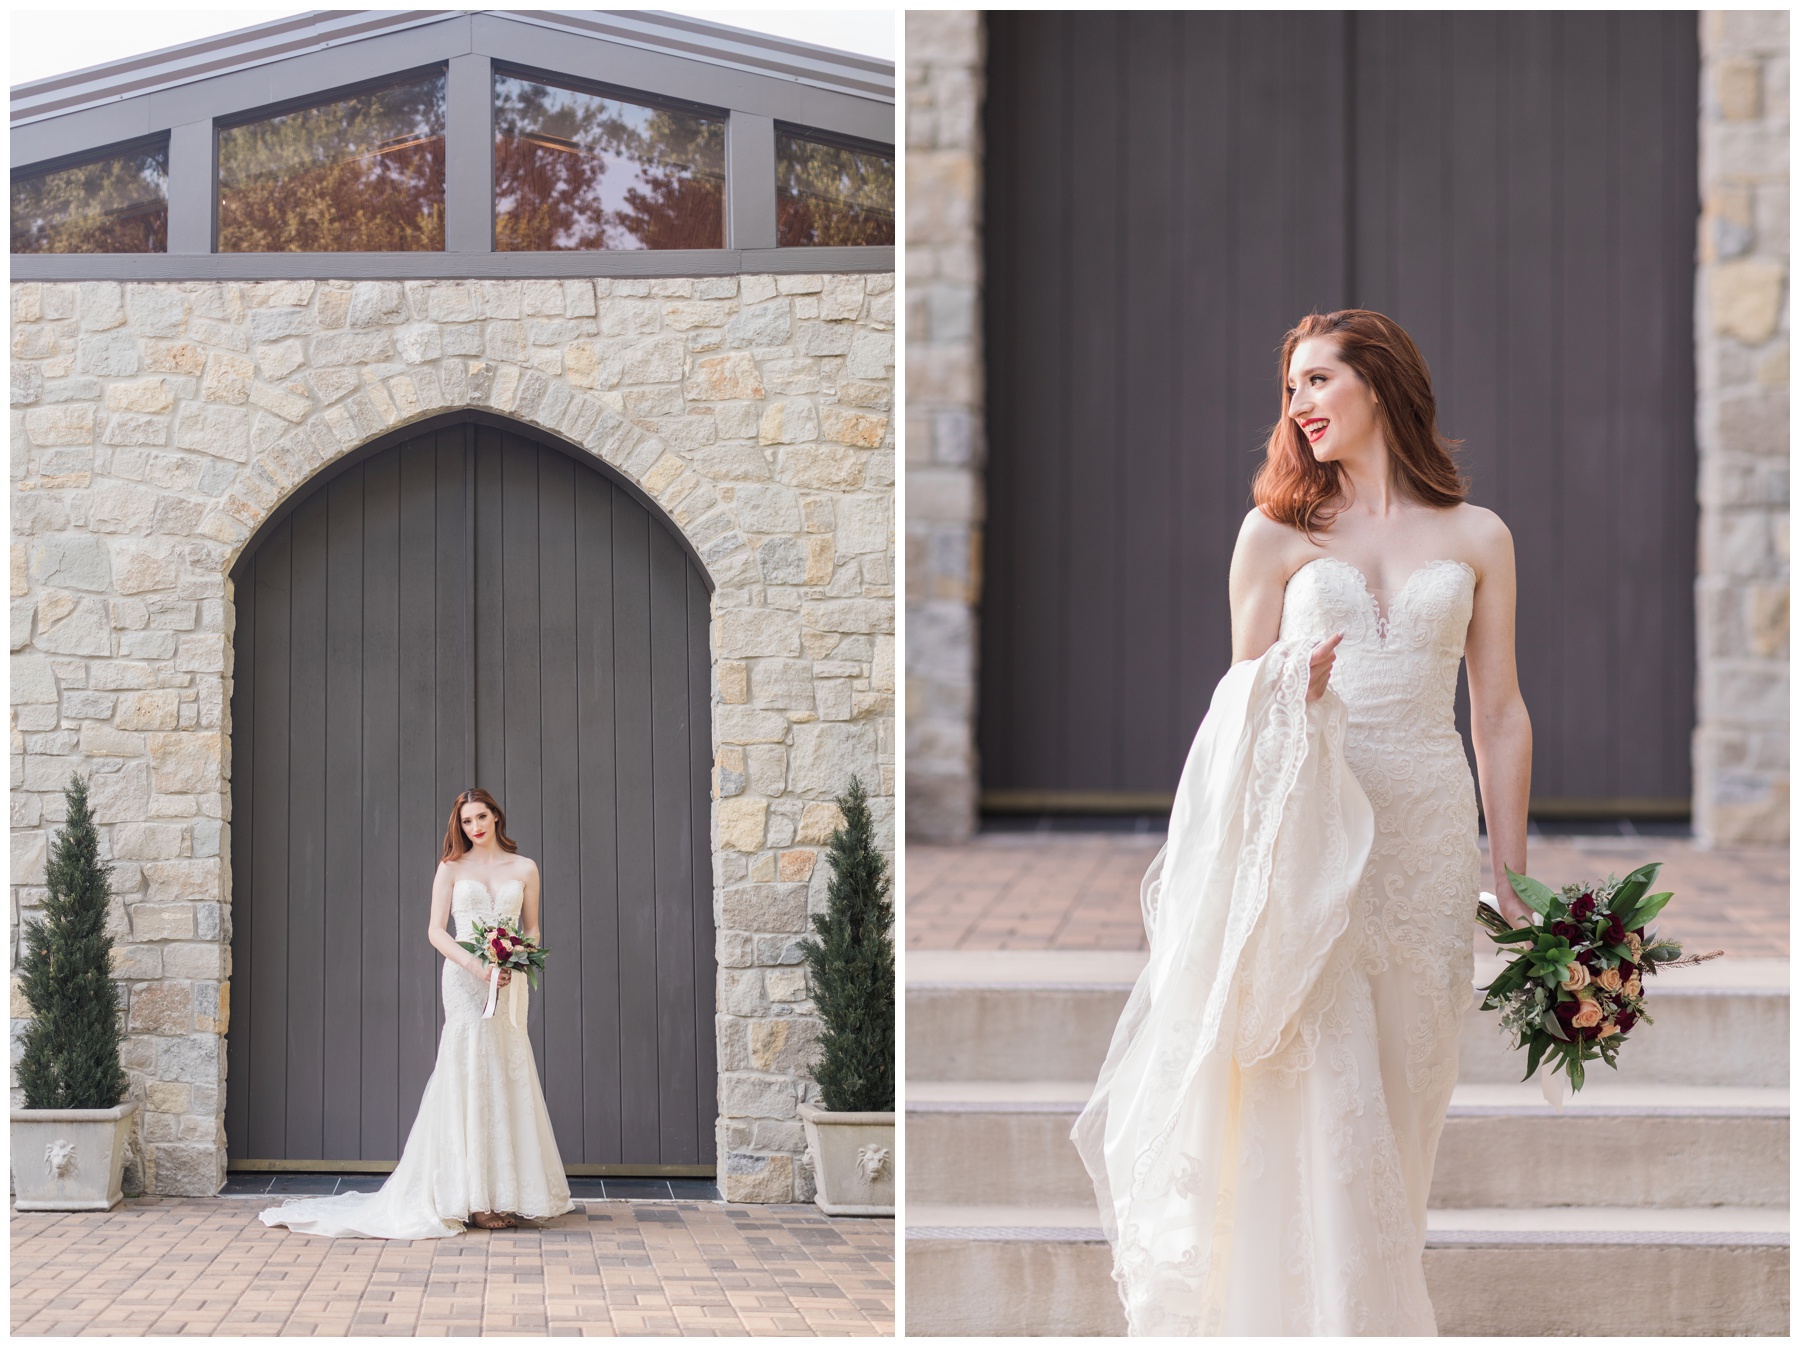 Bridal Session at The Annex in Navasota